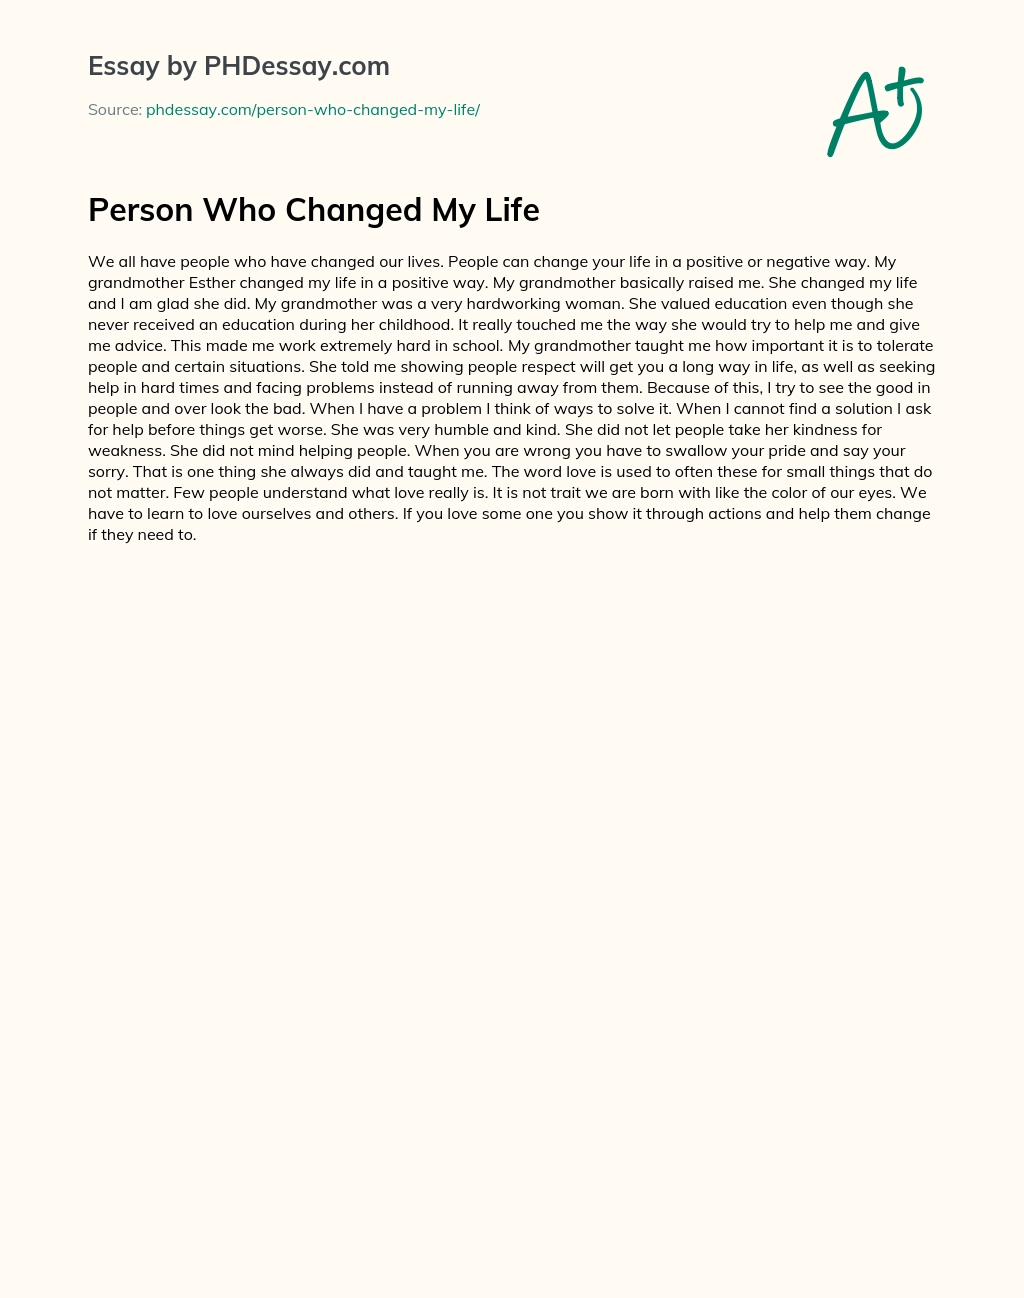 Person Who Changed My Life essay